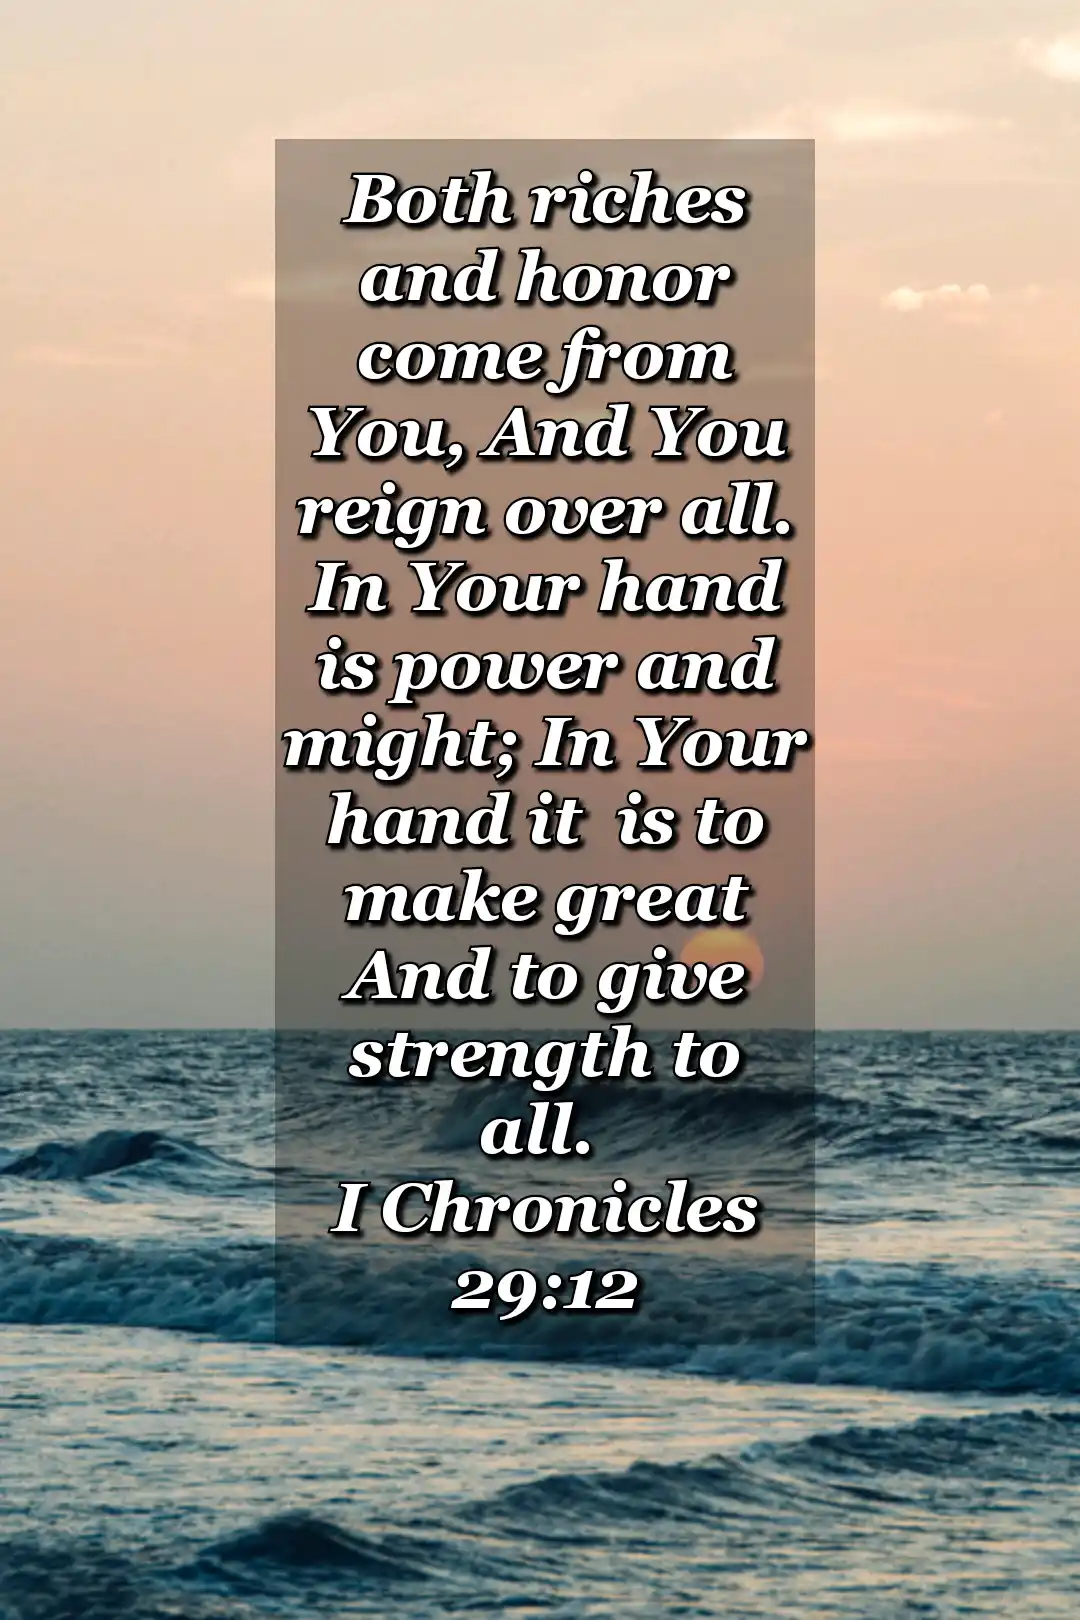 Bible-Verses-about-strength (1 Chronicles 29:12)